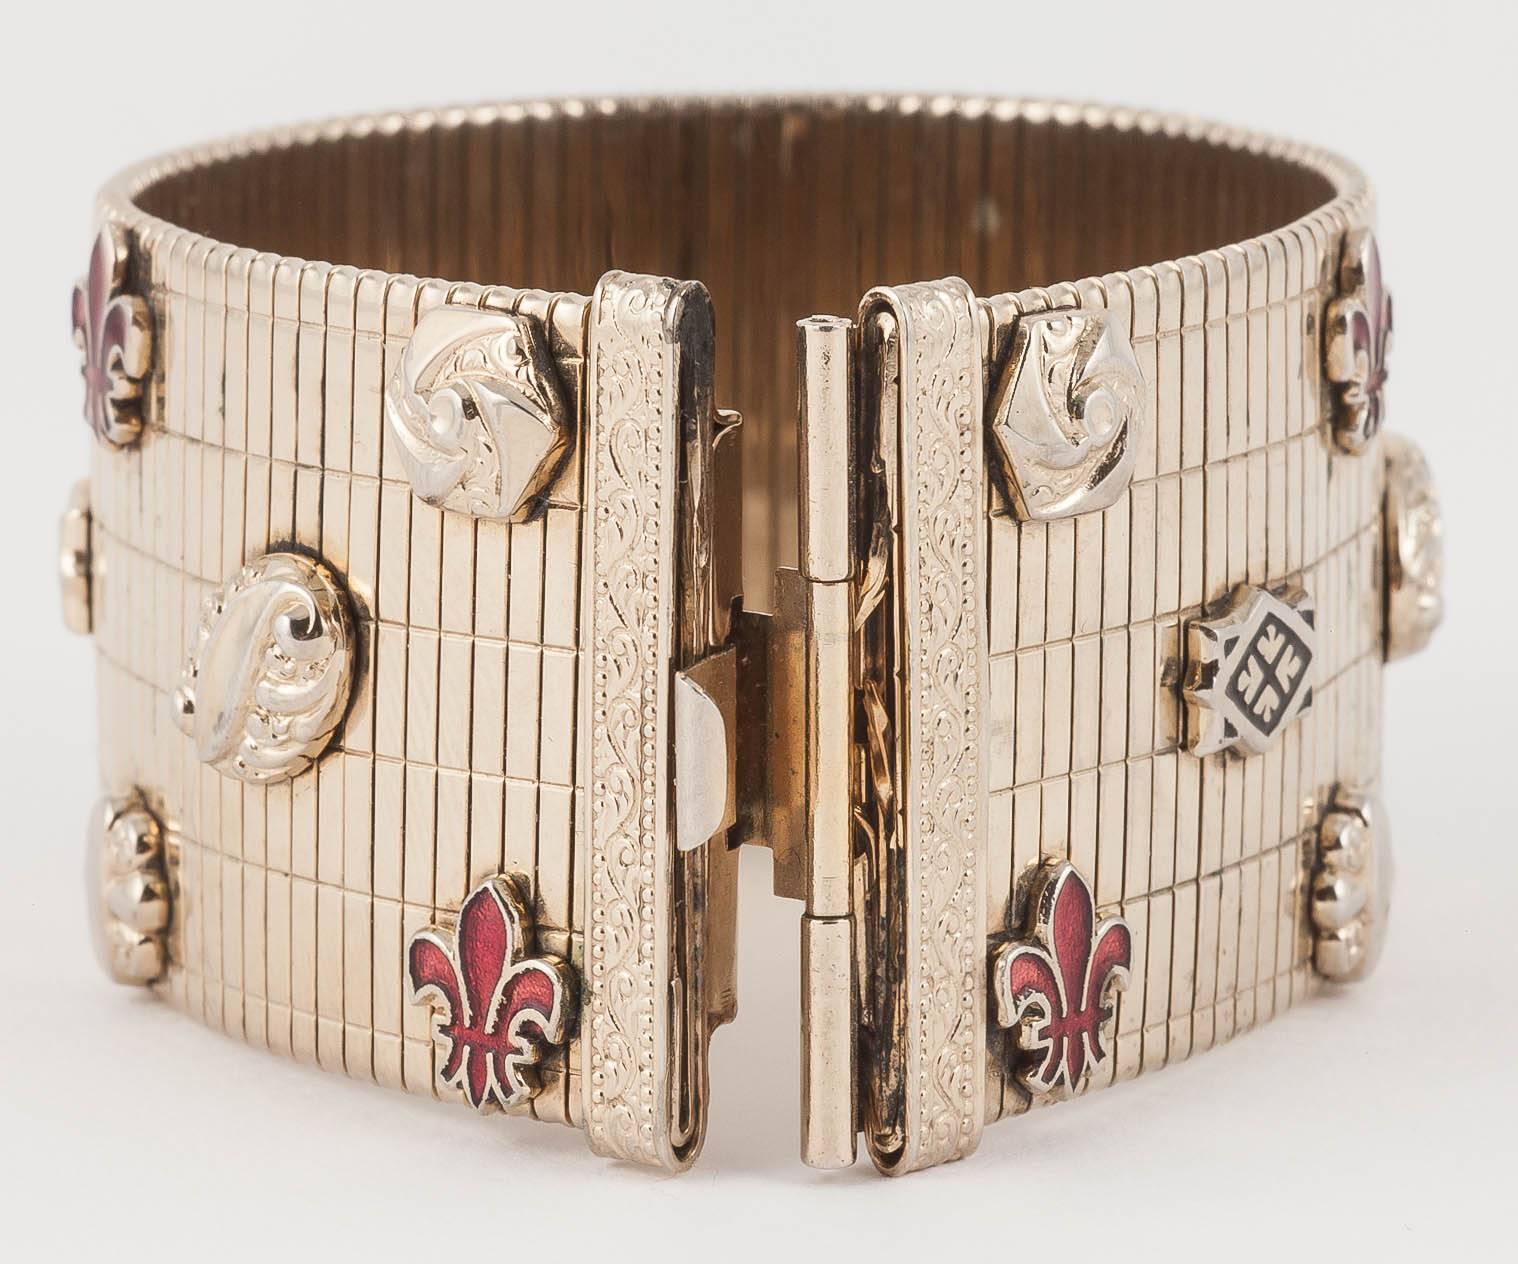 This is such a smart retro bracelet, featuring a cuff shape bracelet which moulds to the wrist like a huge watch strap and has enamelled 'fleur de lys' motifs and other small mounted plaques. The effect is very sophisticated 1940s tailored glamour.